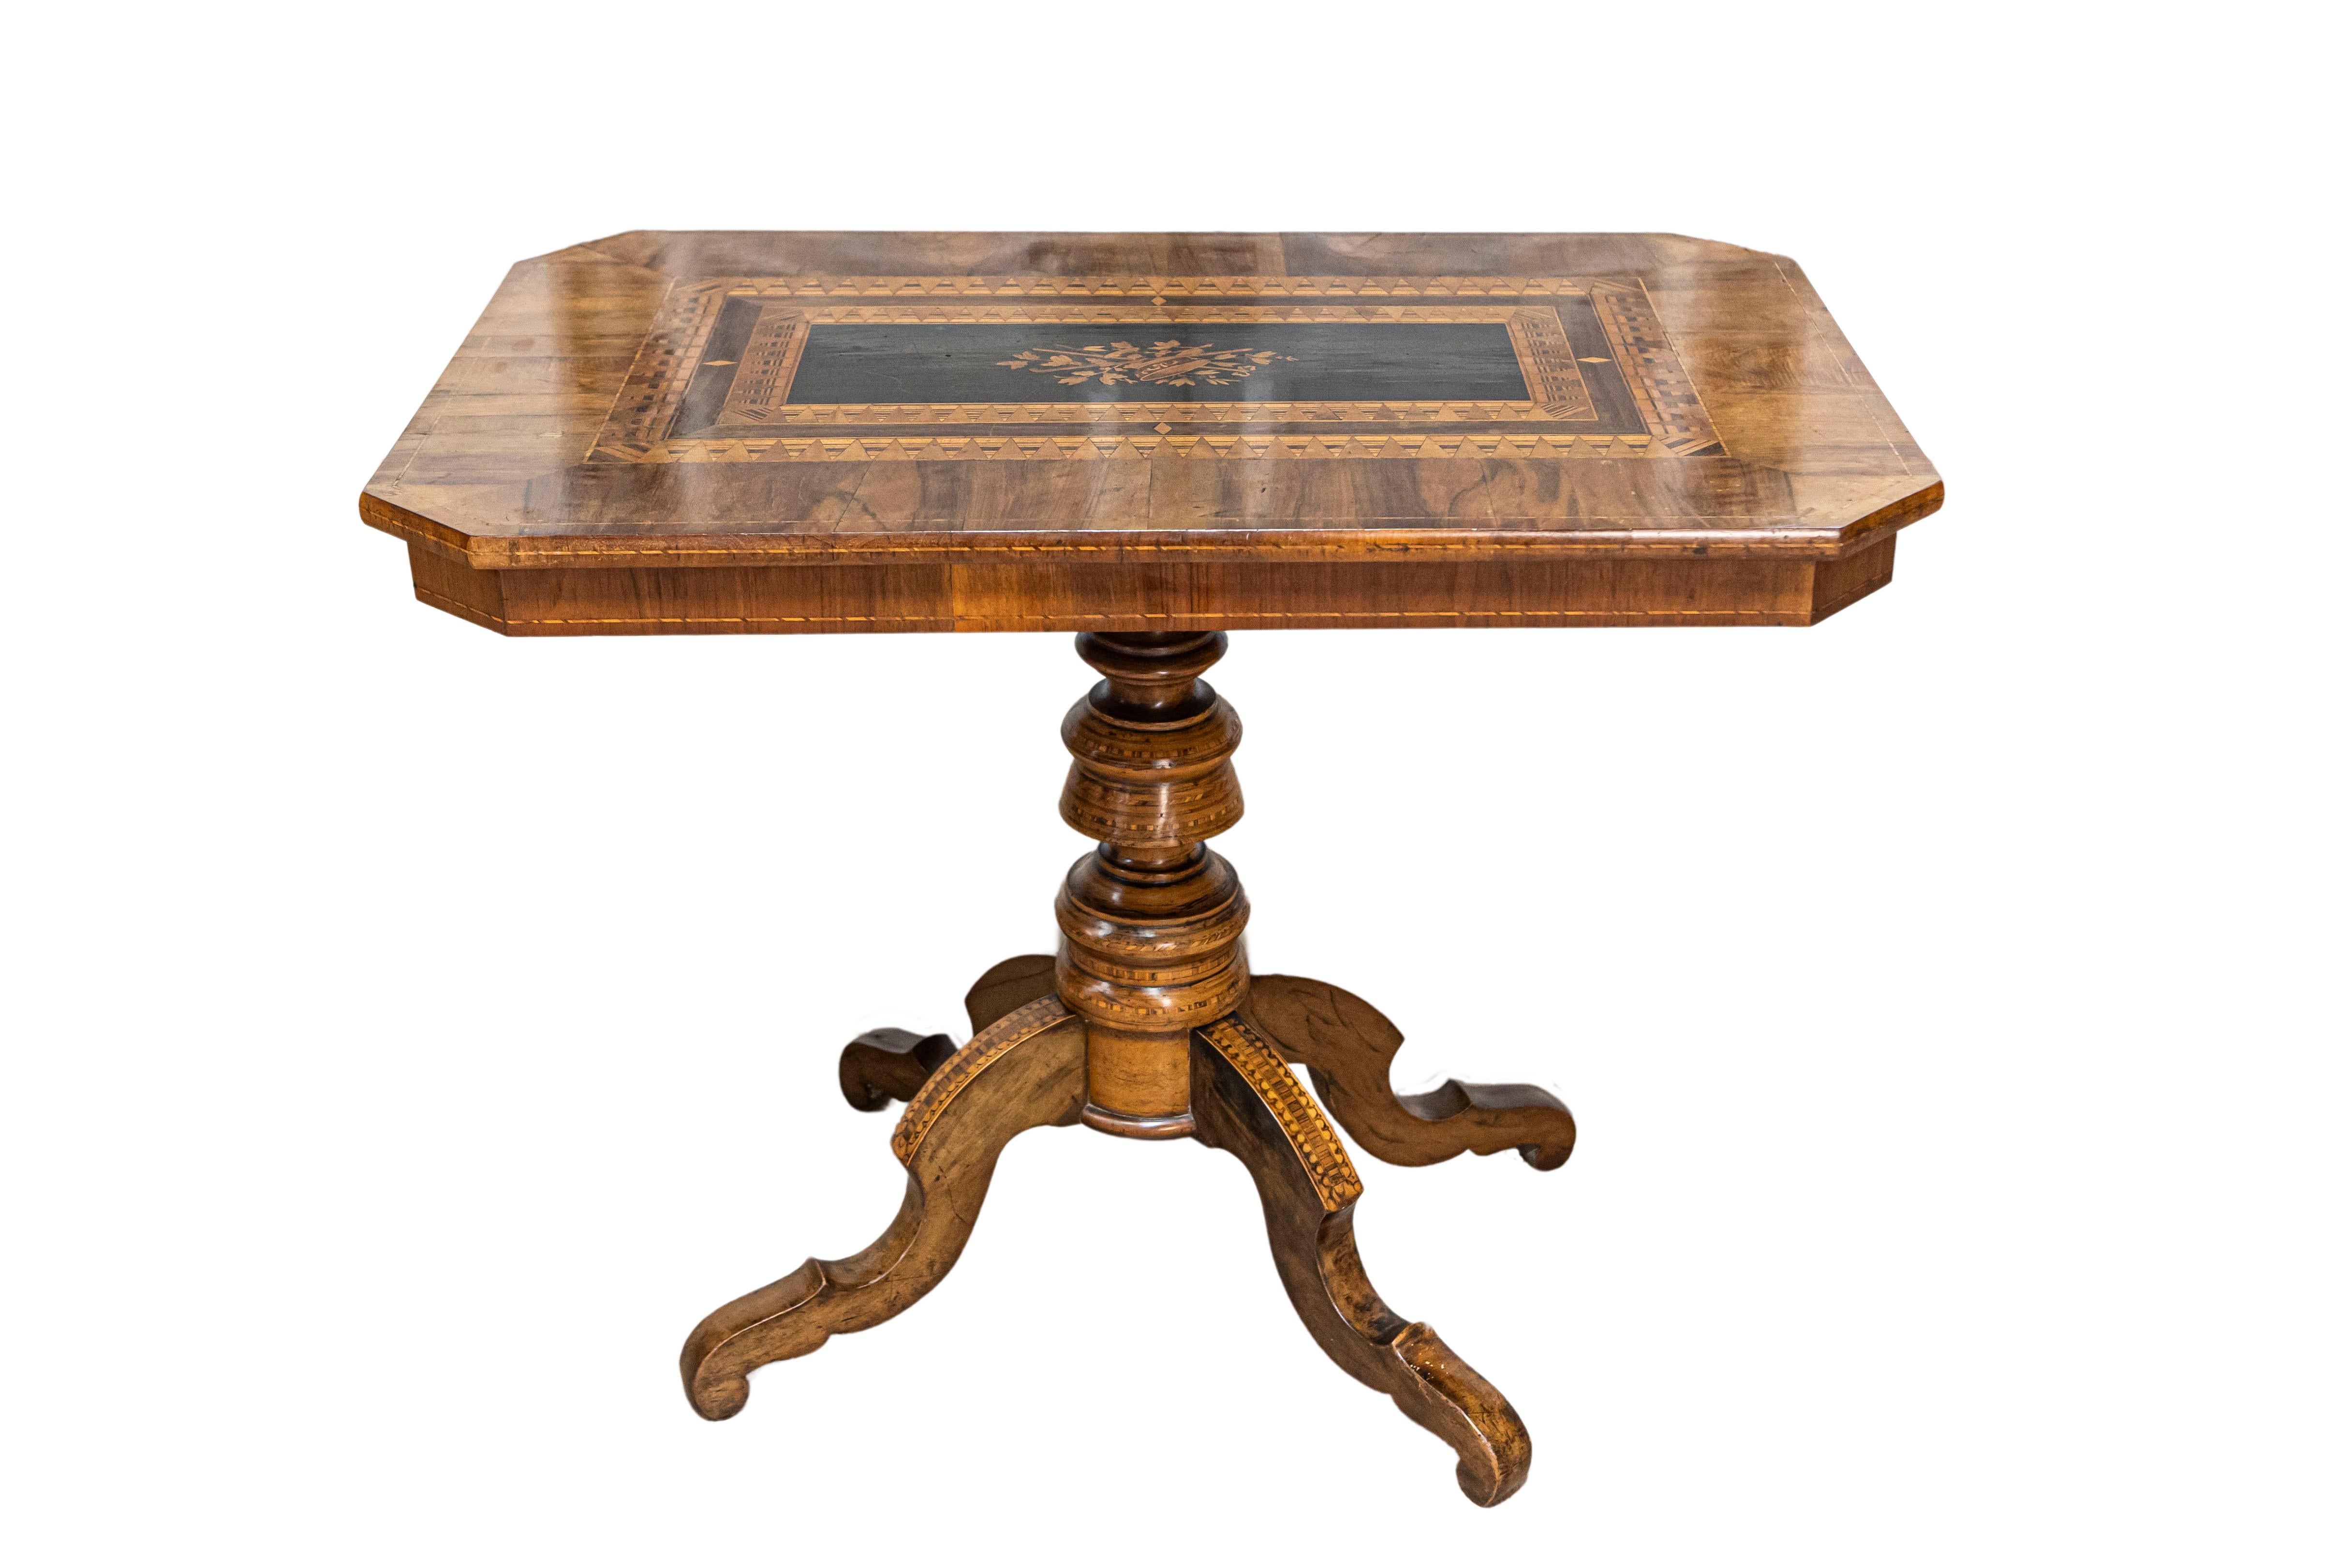 An Italian walnut and mahogany center table from the 19th century with floral marquetry and quadripod base. This exquisite 19th-century Italian center table is a masterpiece of craftsmanship, featuring a blend of walnut and mahogany woods. The